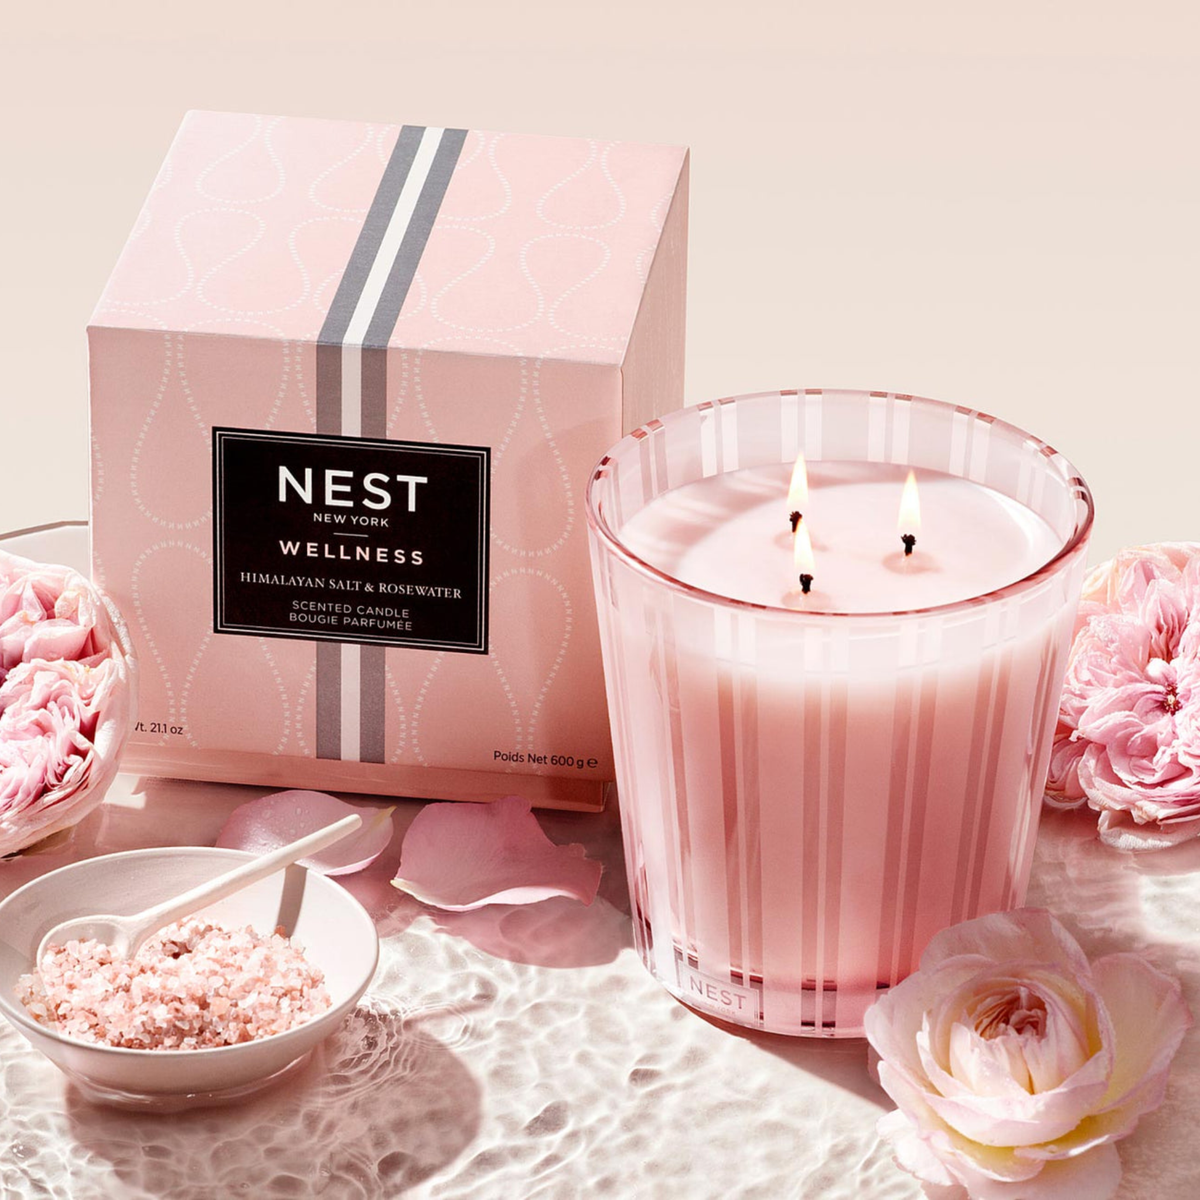 Topview Lifestyle Photo of Nest New York Himalayan Salt &amp; Rosewater 3-Wick Candle with Box